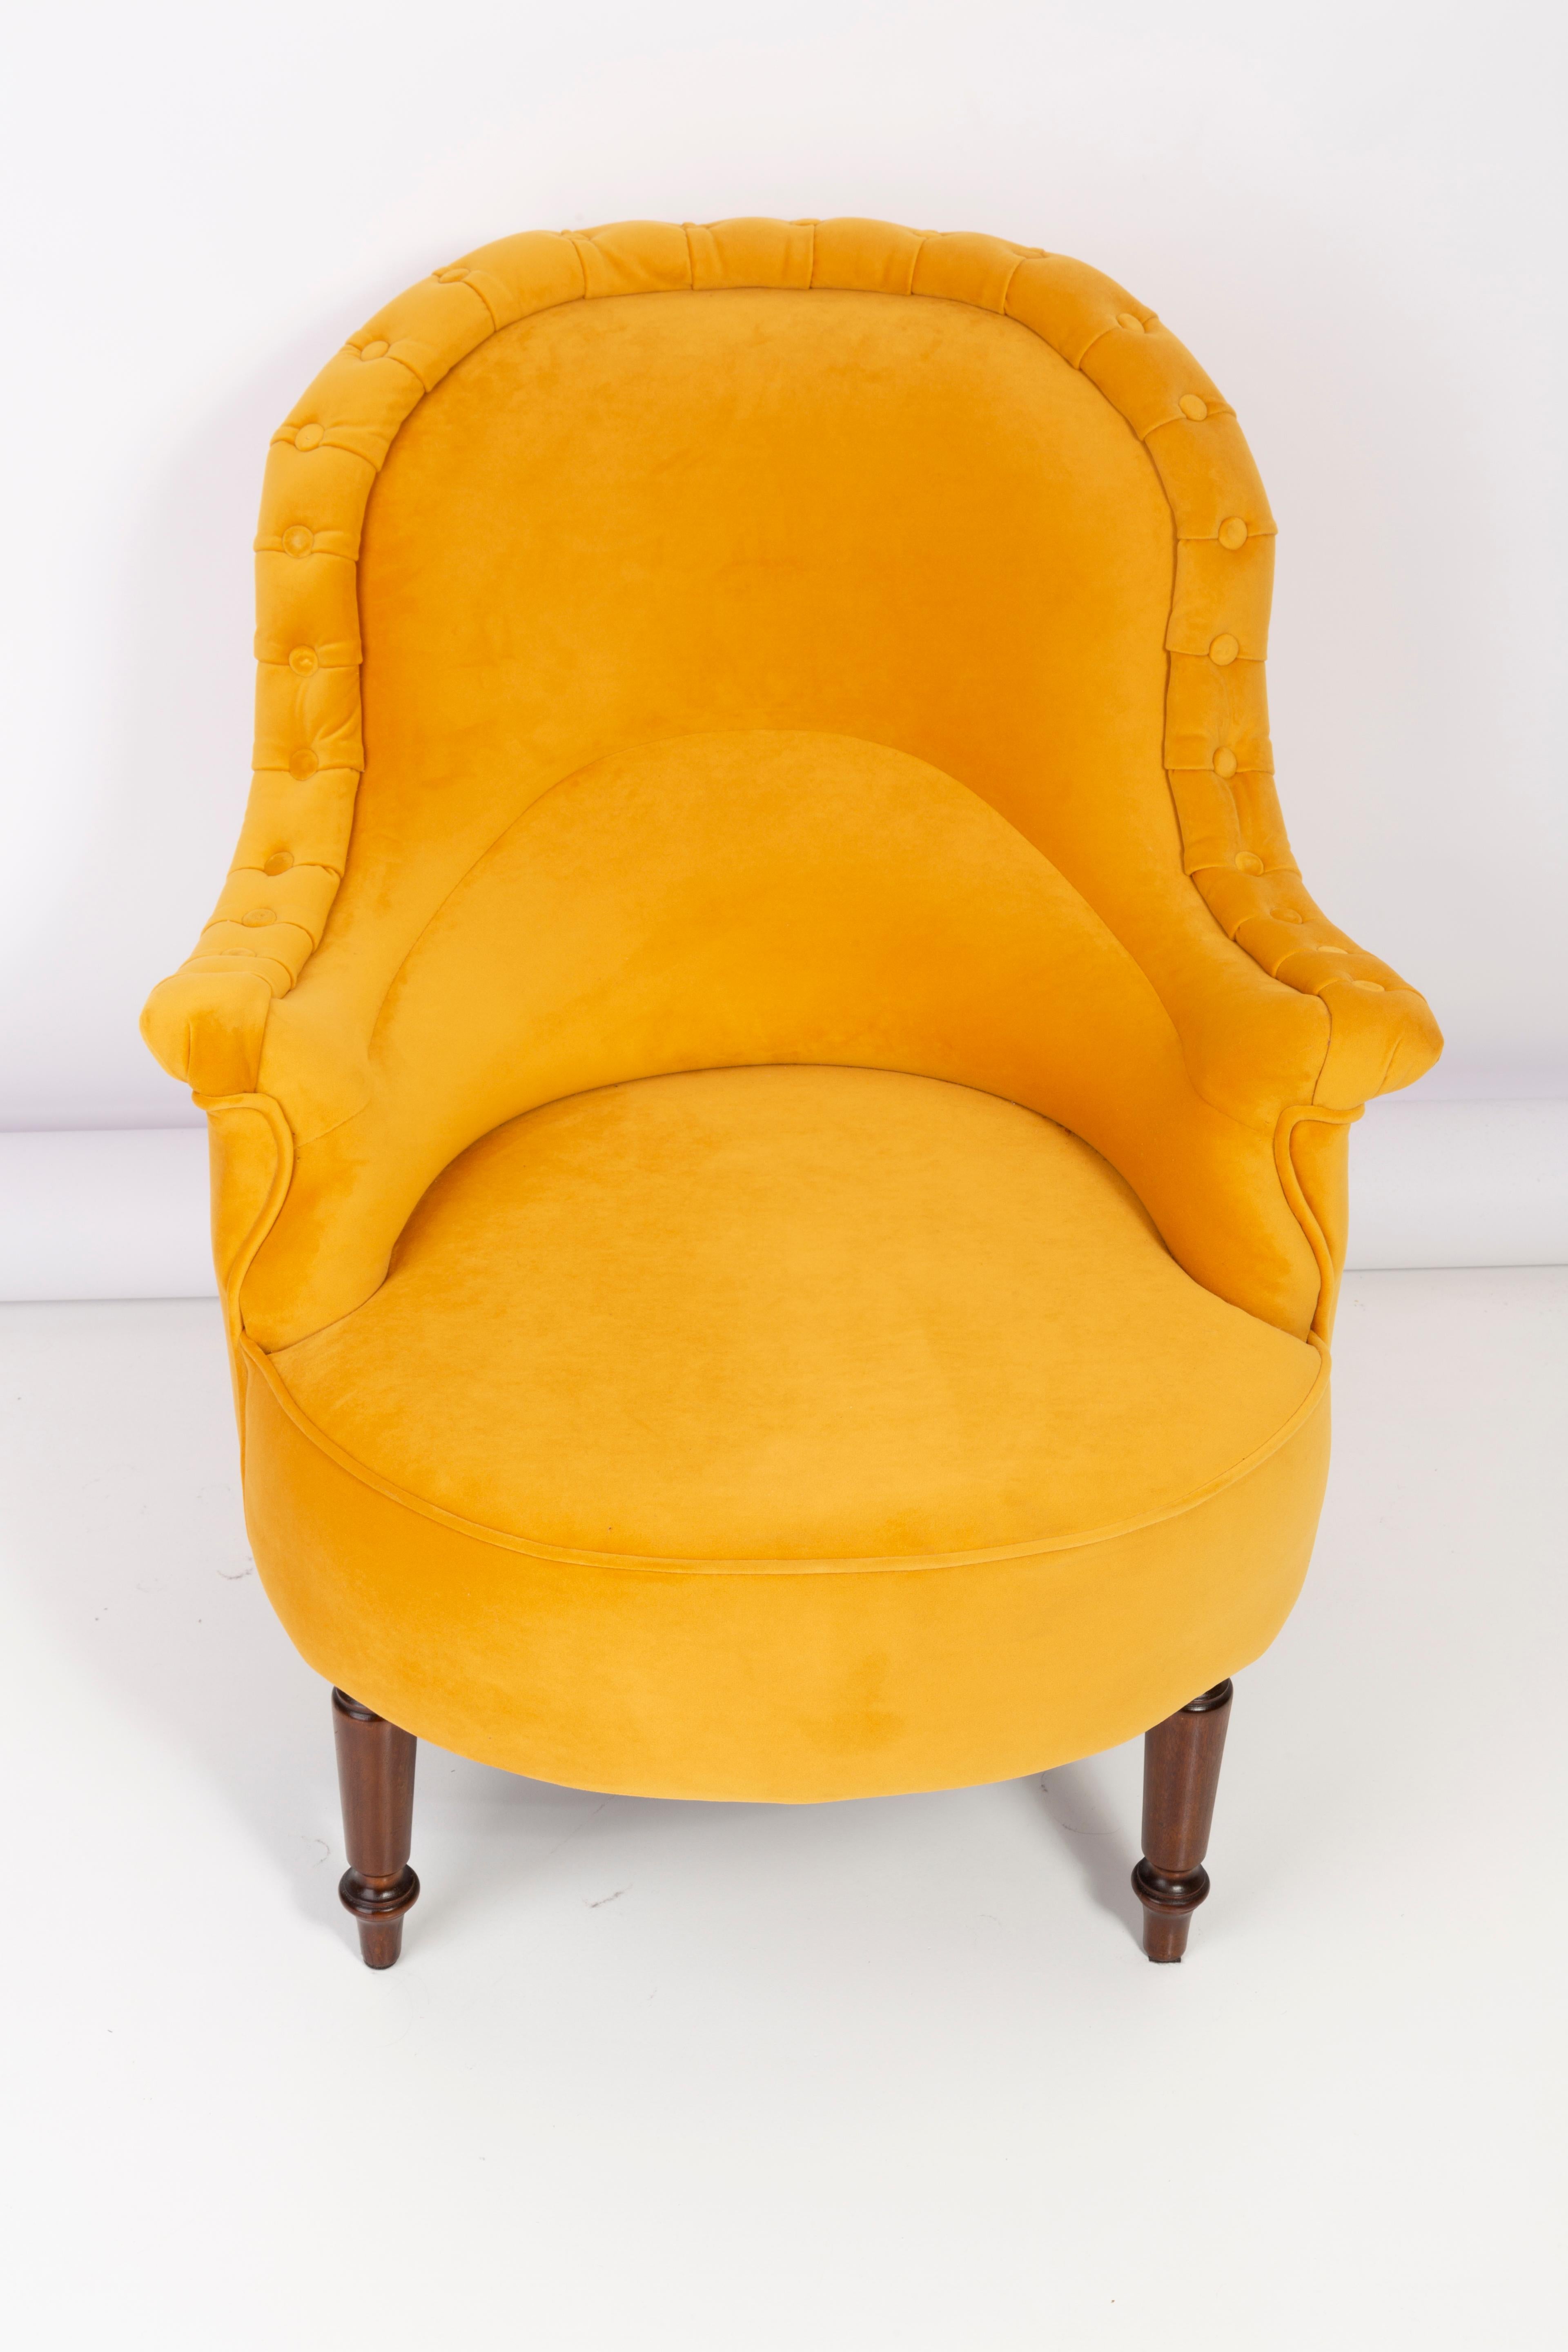 Hand-Crafted Unique Yellow Mustard Armchair, 1930s, Germany For Sale